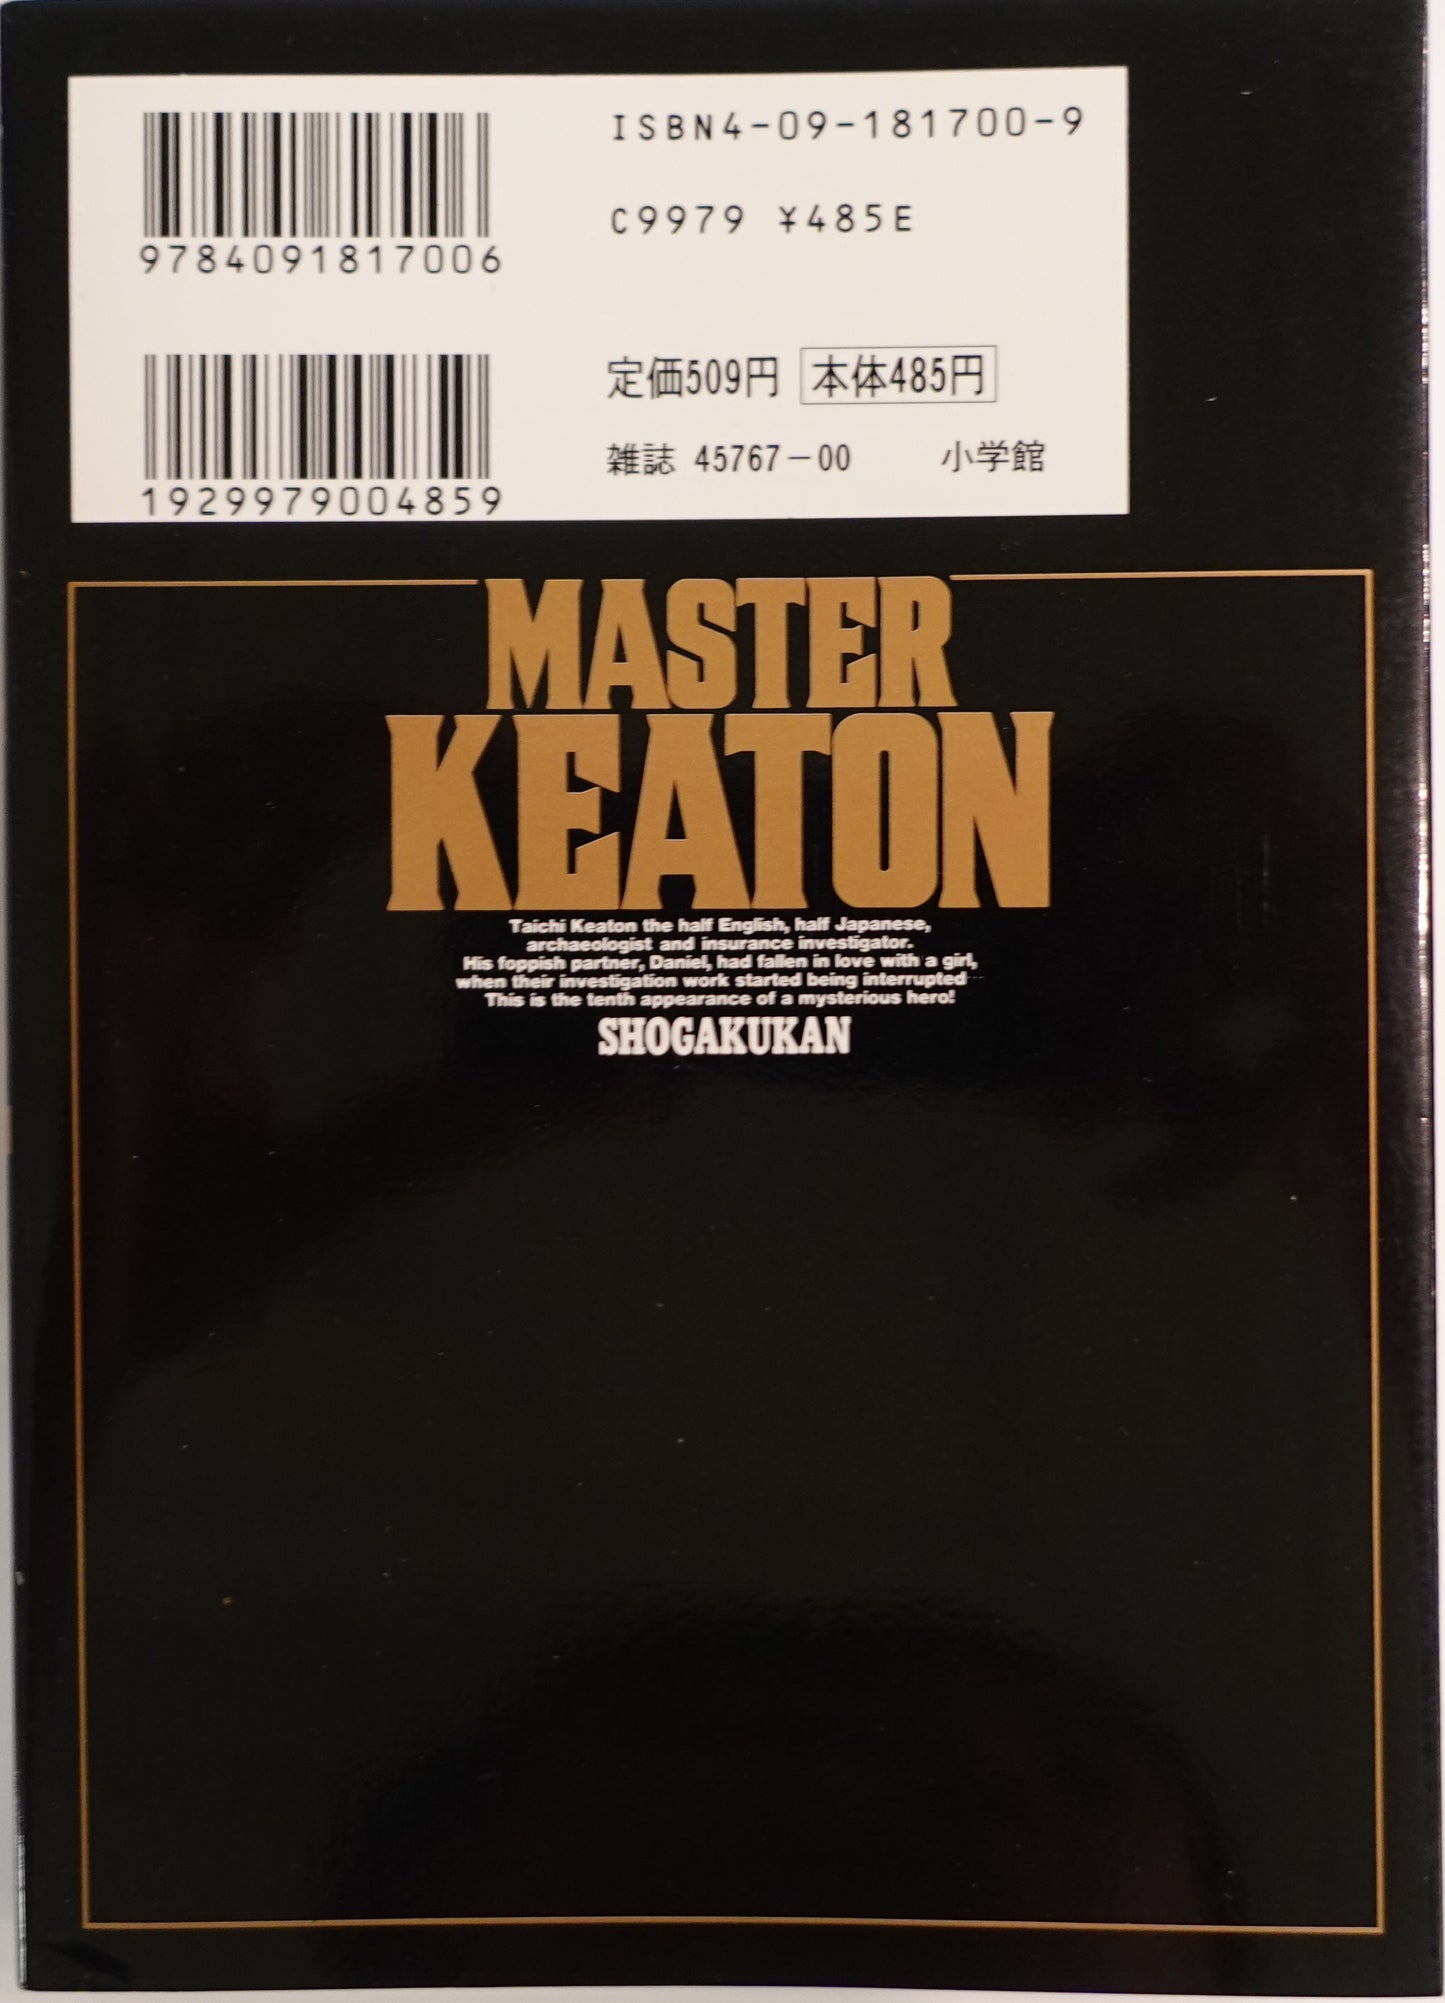 Mater Keaton Vol.10-Official Japanese Edition